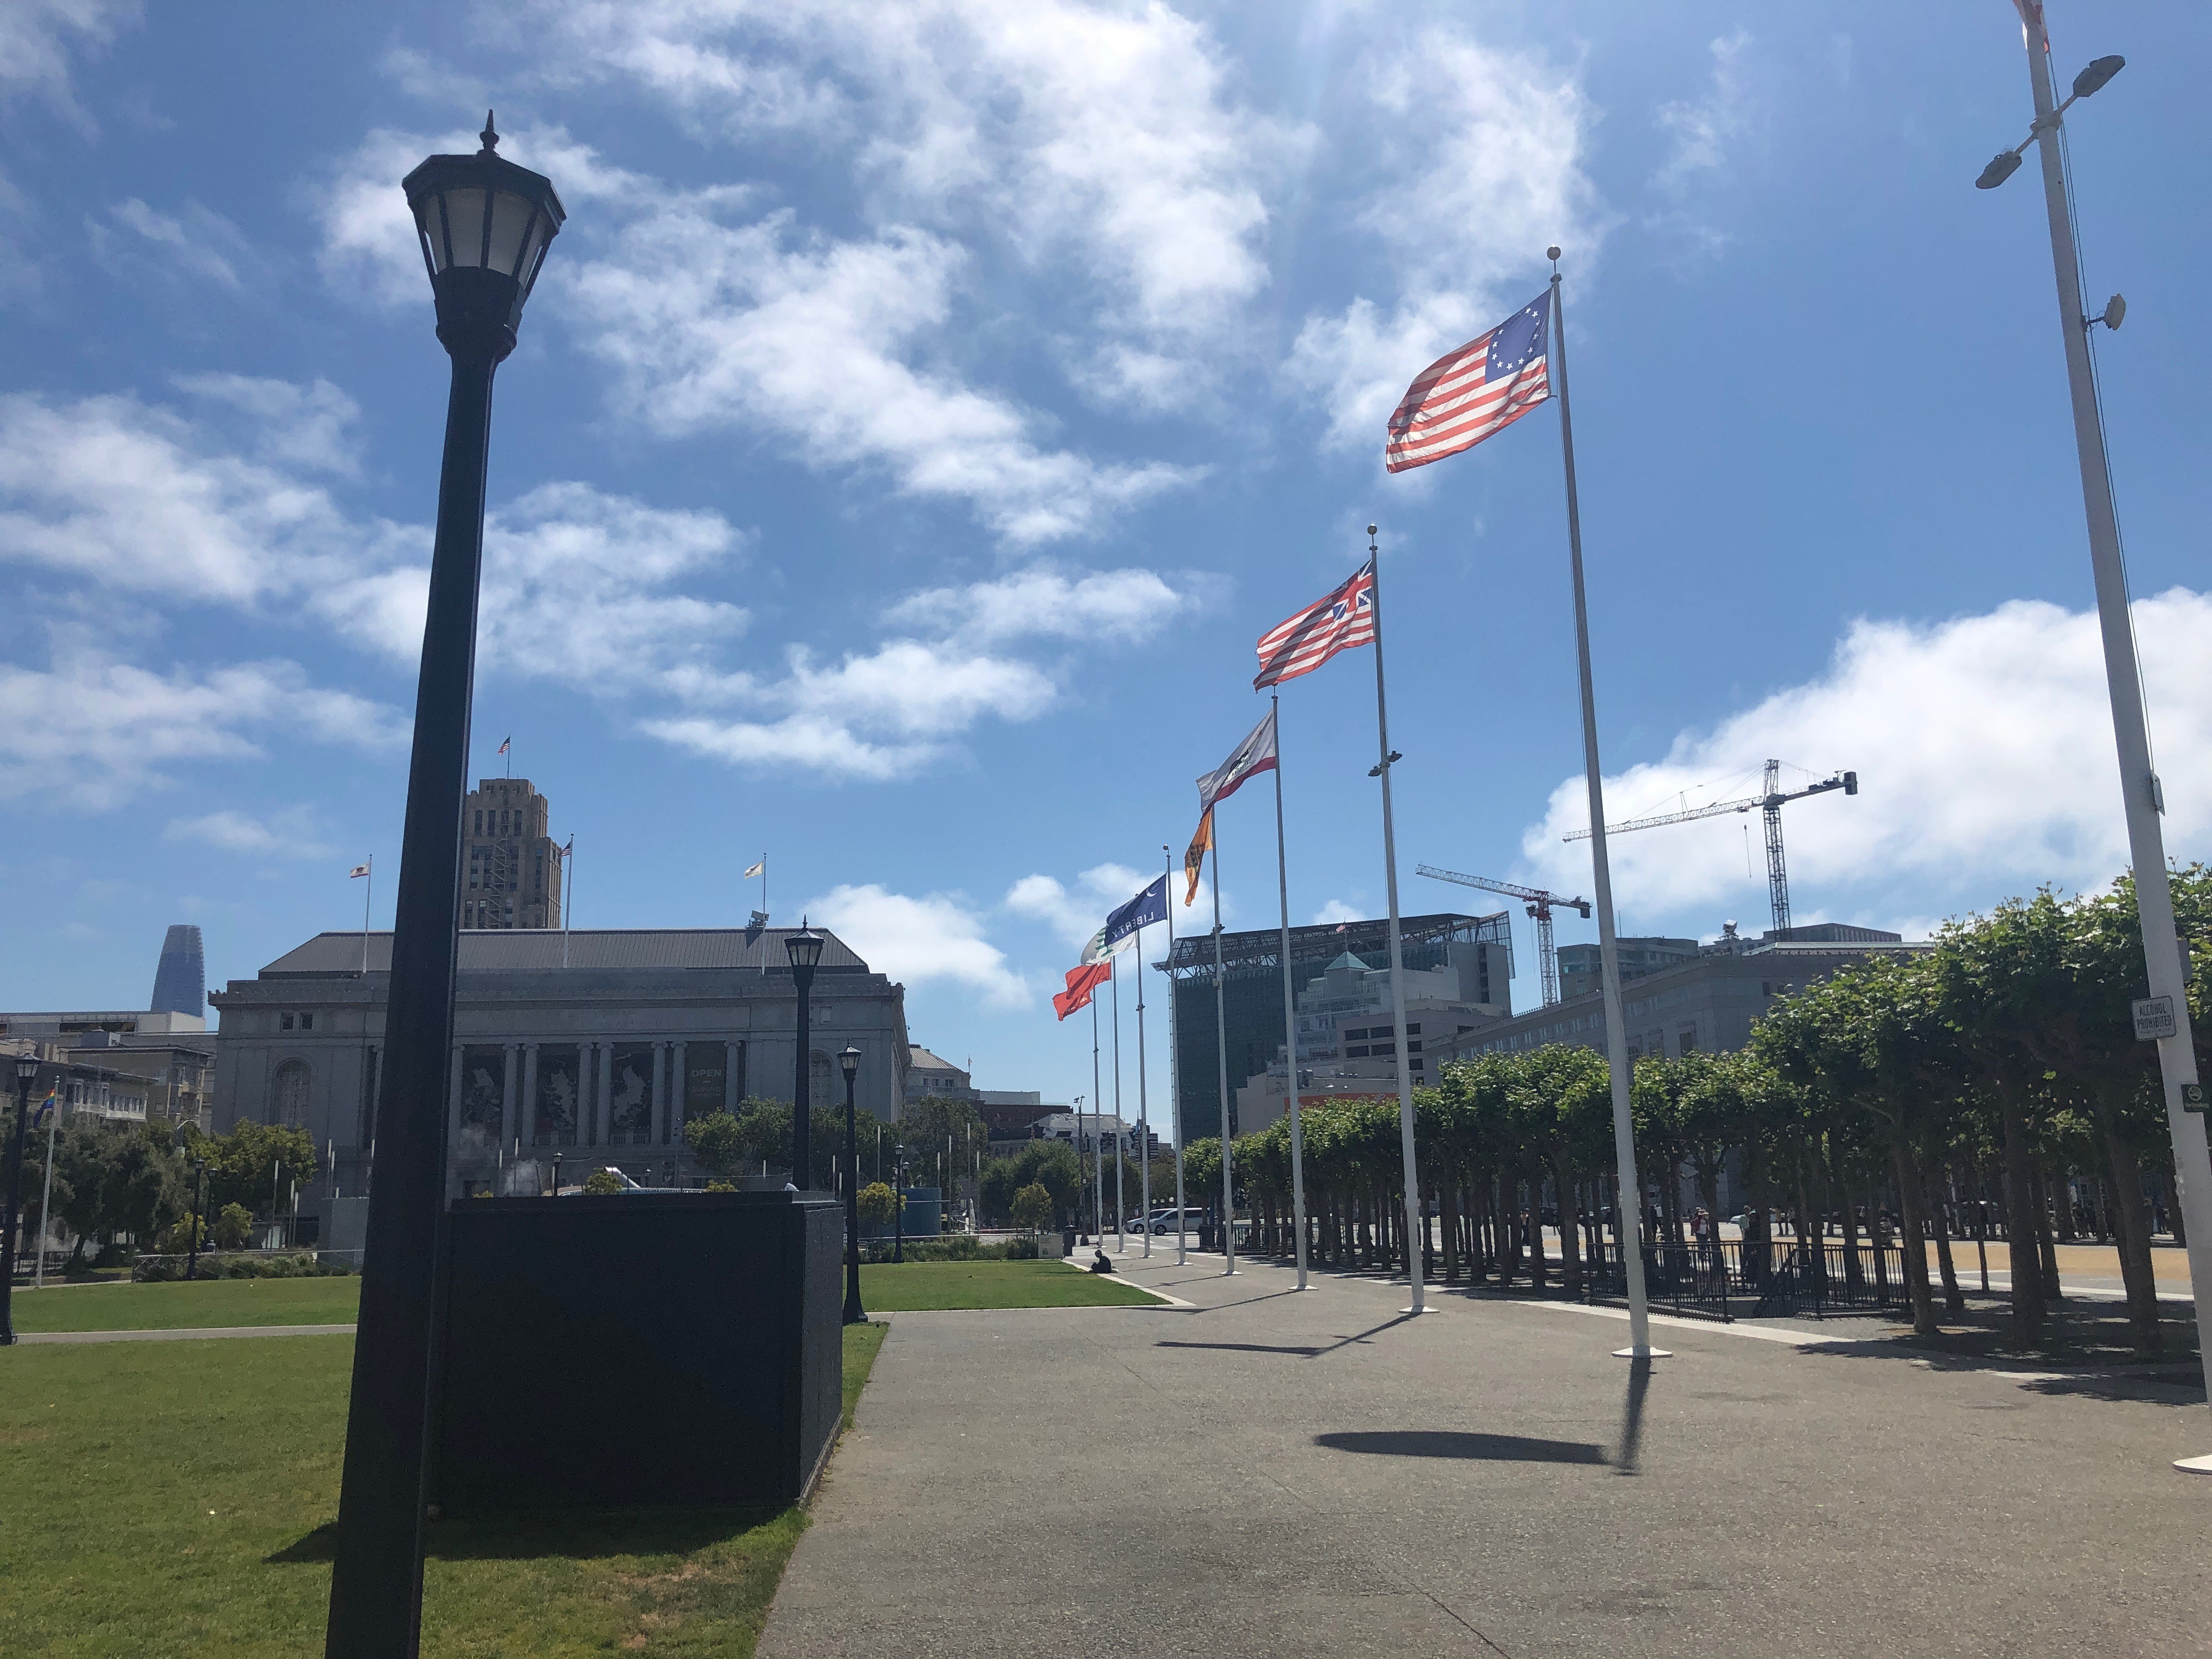 A Betsy Ross flag flying in the "Pavilion of American Flags" outside San Francisco City Hall on July 4, 2019. (DCNF/Courtesy of Bob Tutag)